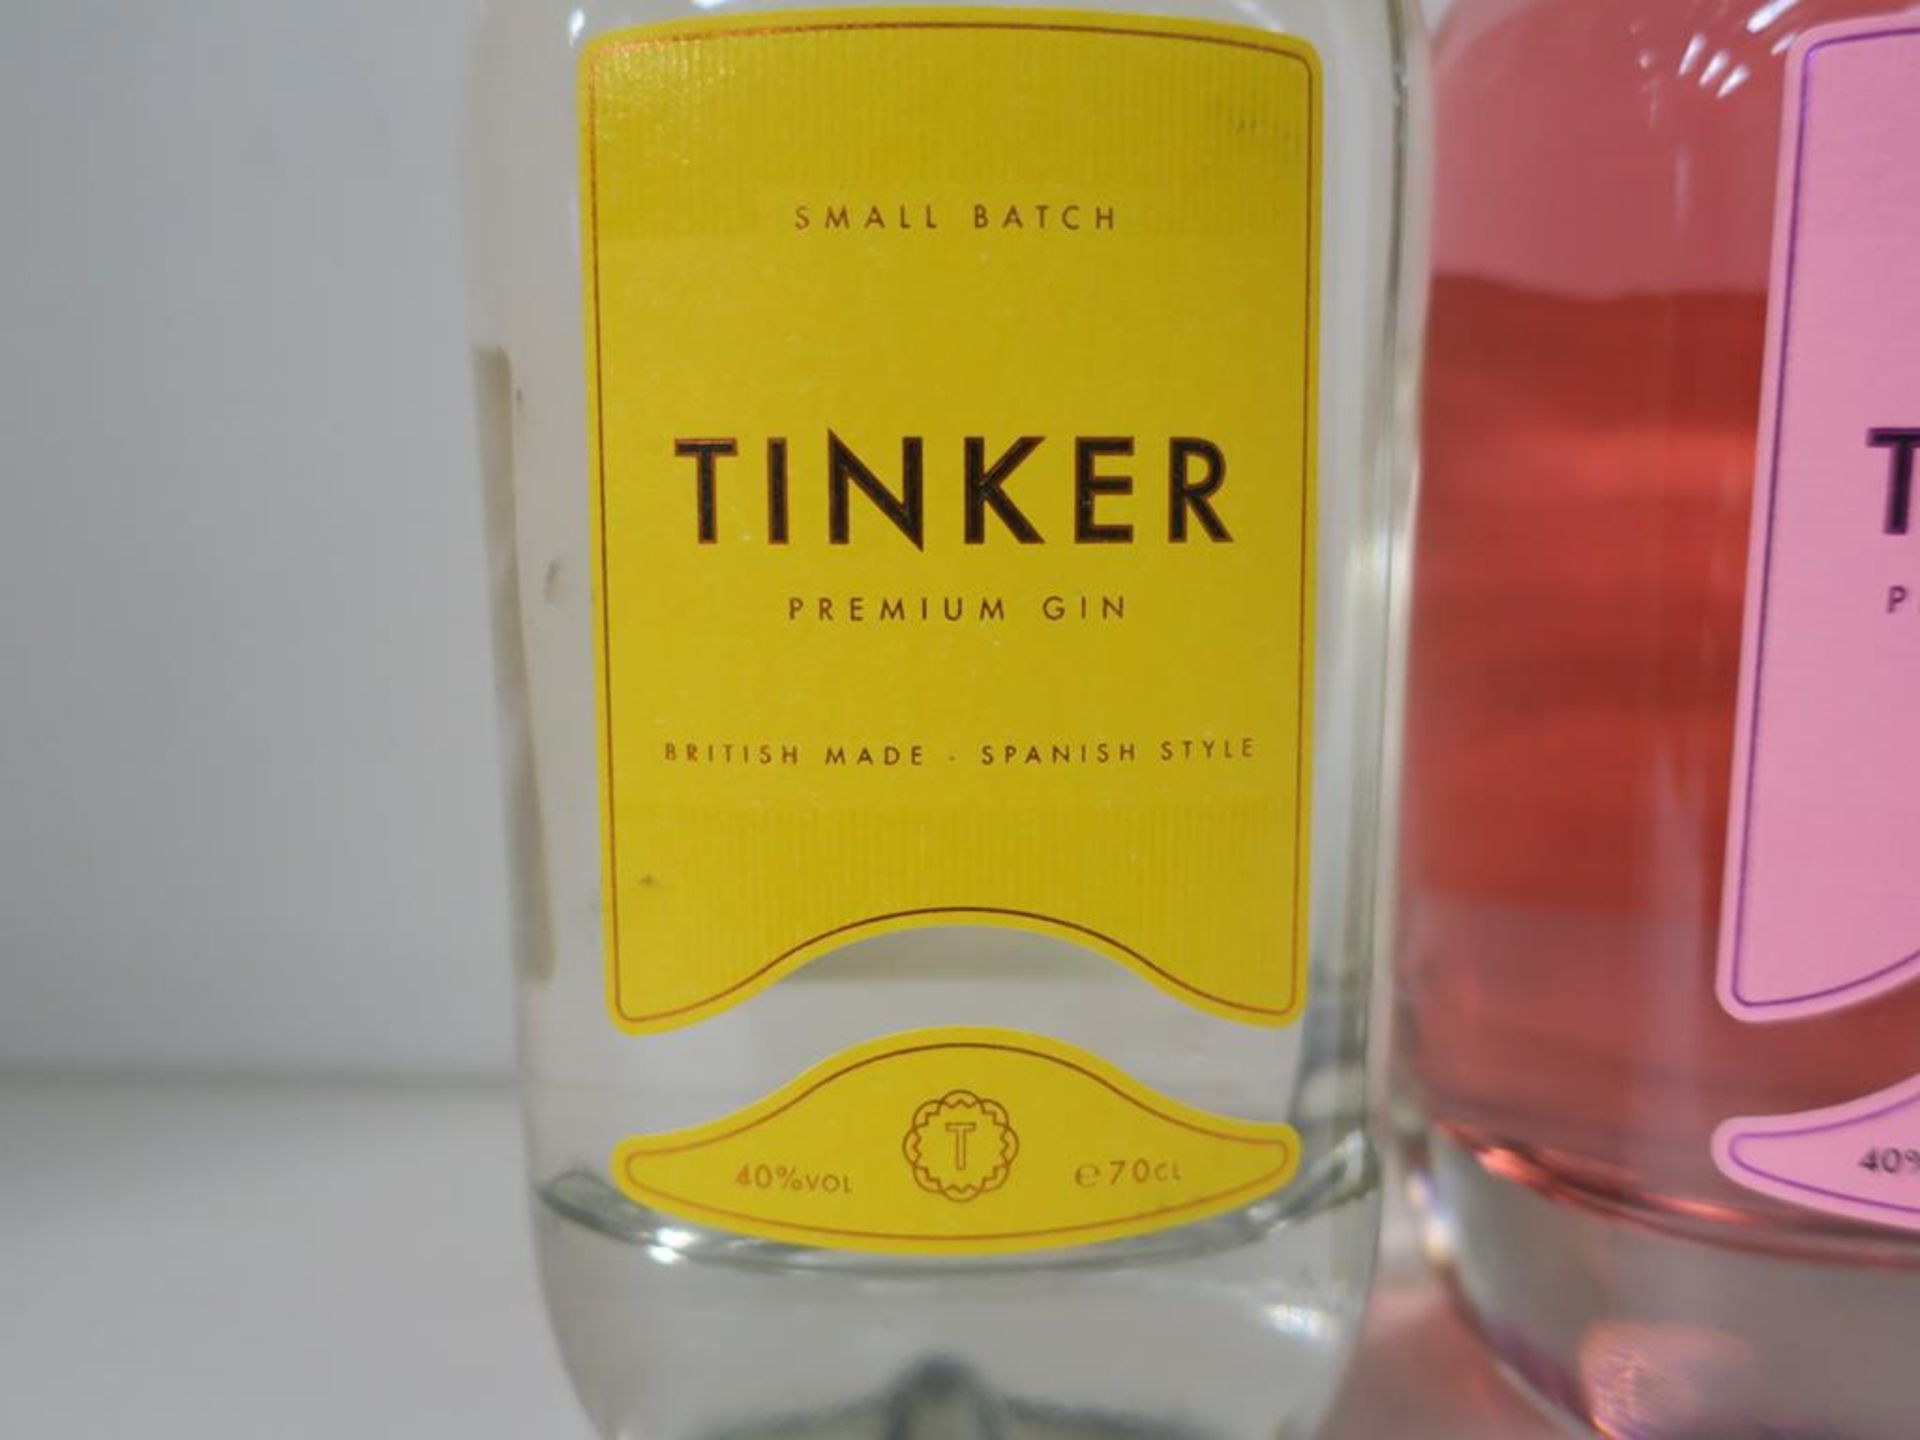 * Three bottles of Tinker Gin: 70cl bottle of Small Batch, British made Spanish style 40% vol, - Image 2 of 7